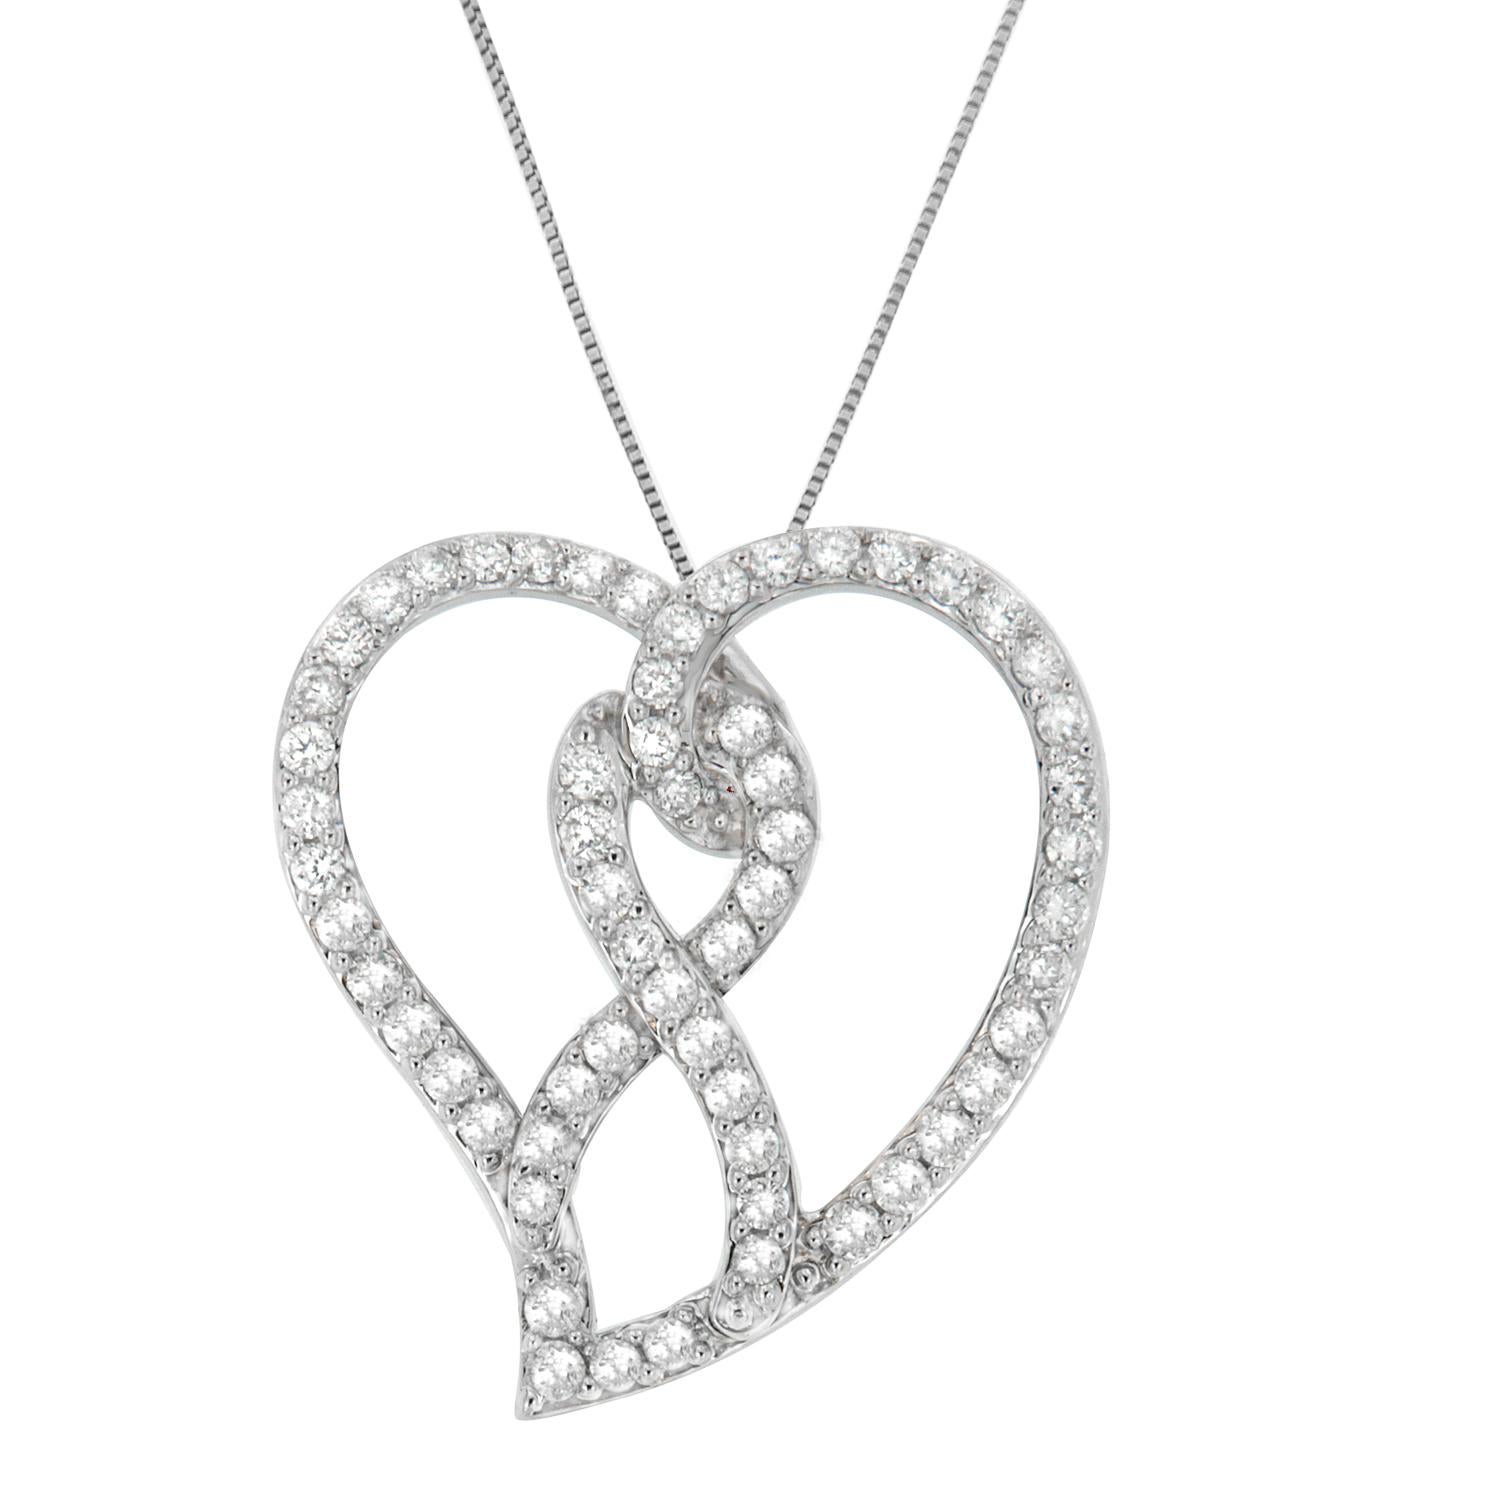 Revamp her Valentines Day look with this beautiful Heart Pendant. Chisel to excellence, it is created with 14 karats white gold and features ribbon accent in the center. Sophisticated yet dazzling, this classy ornament is adorned with shimmery round